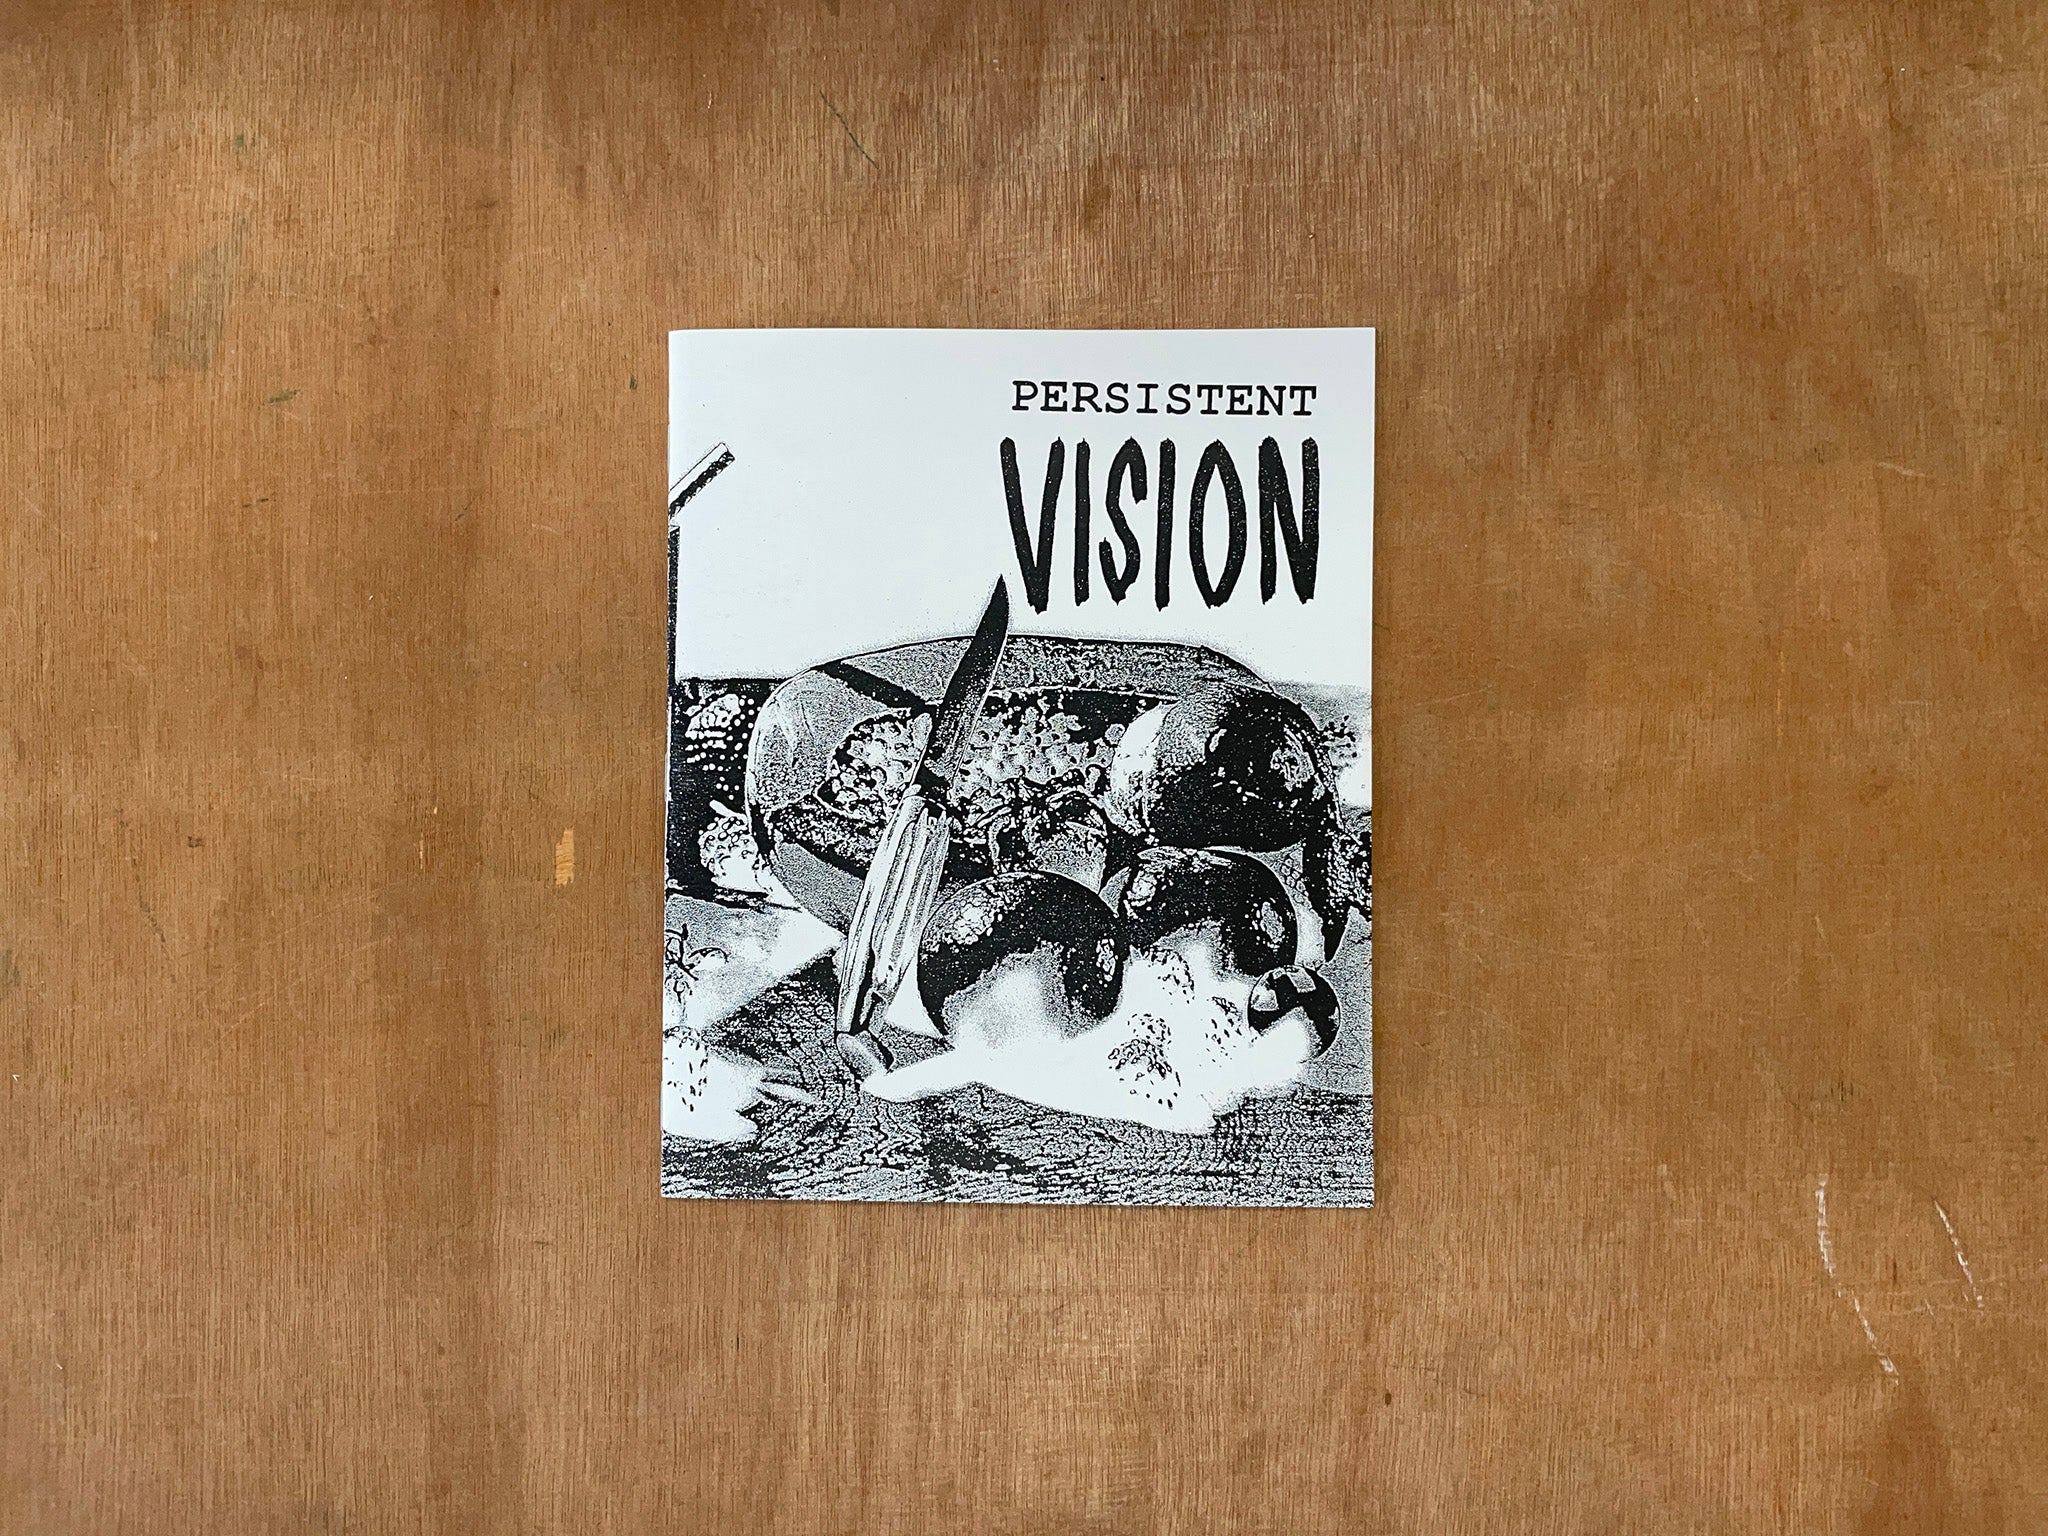 PERSISTENT VISION by Jason Rusnock